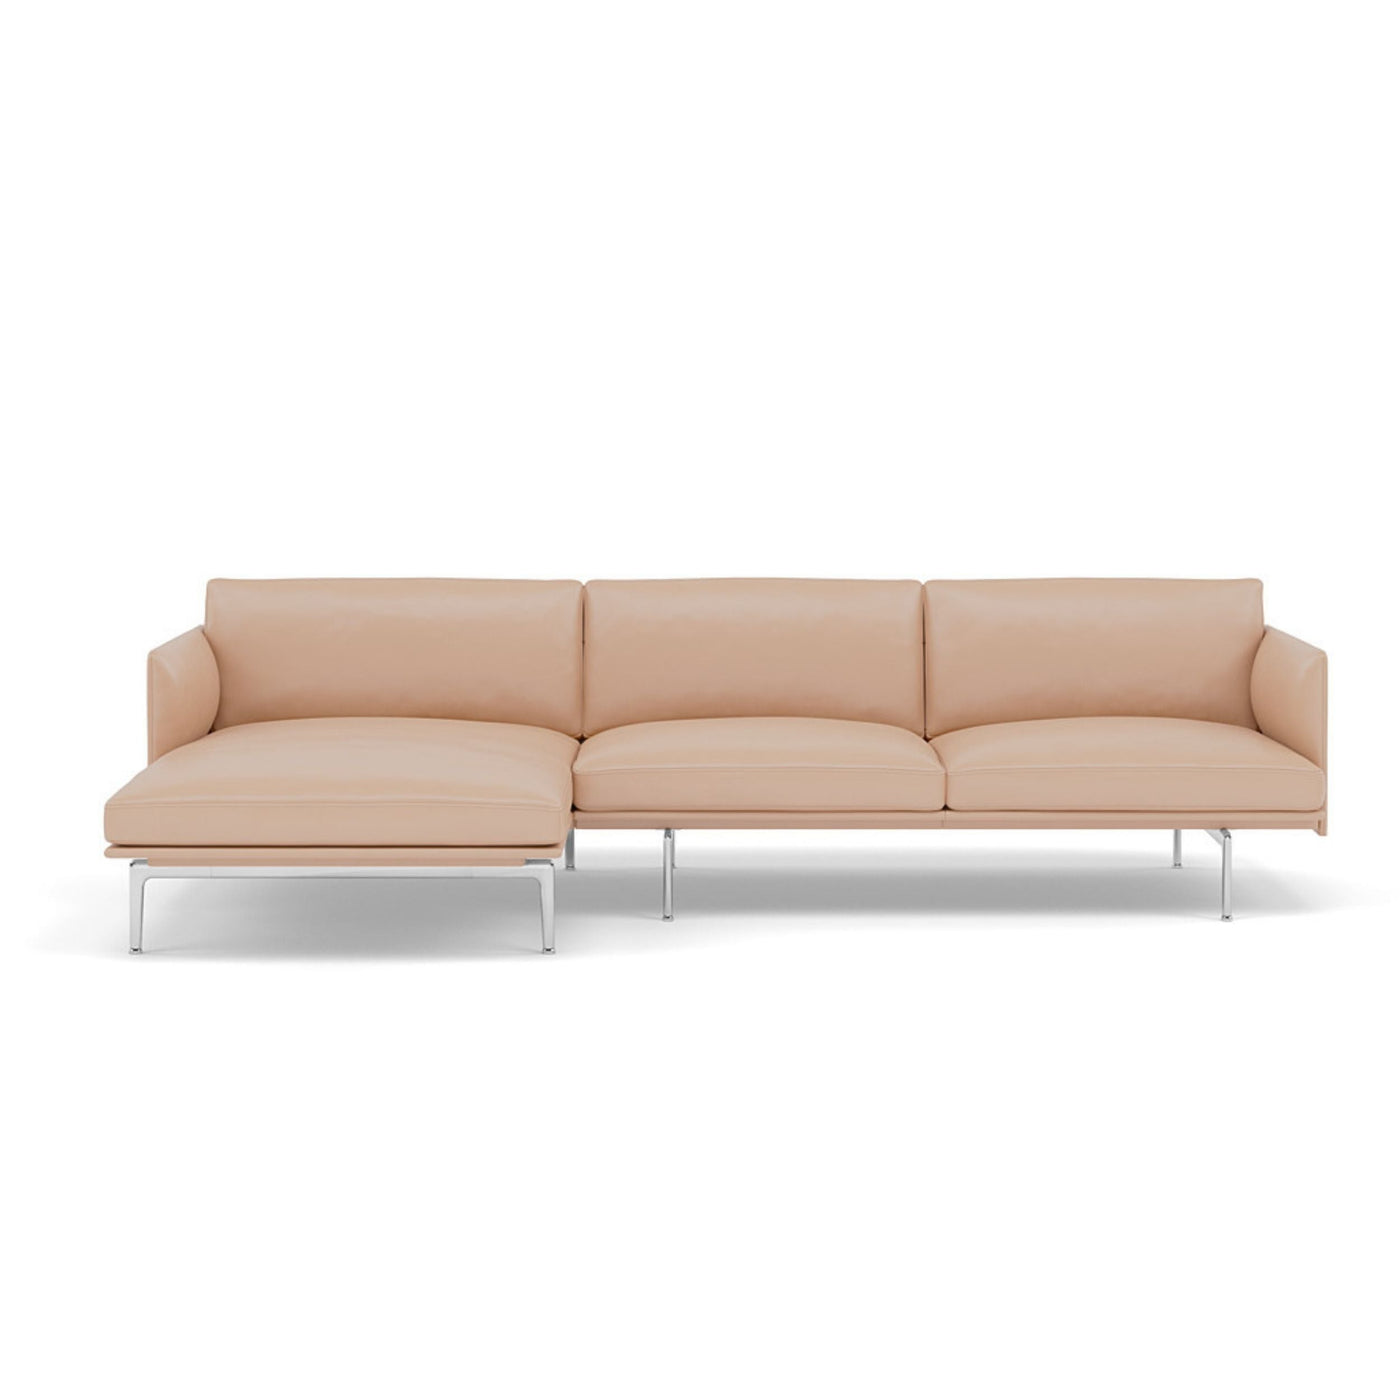 Muuto Outline Chaise Longue sofa in beige refine leather. Made to order from someday designs.  #colour_beige-refine-leather